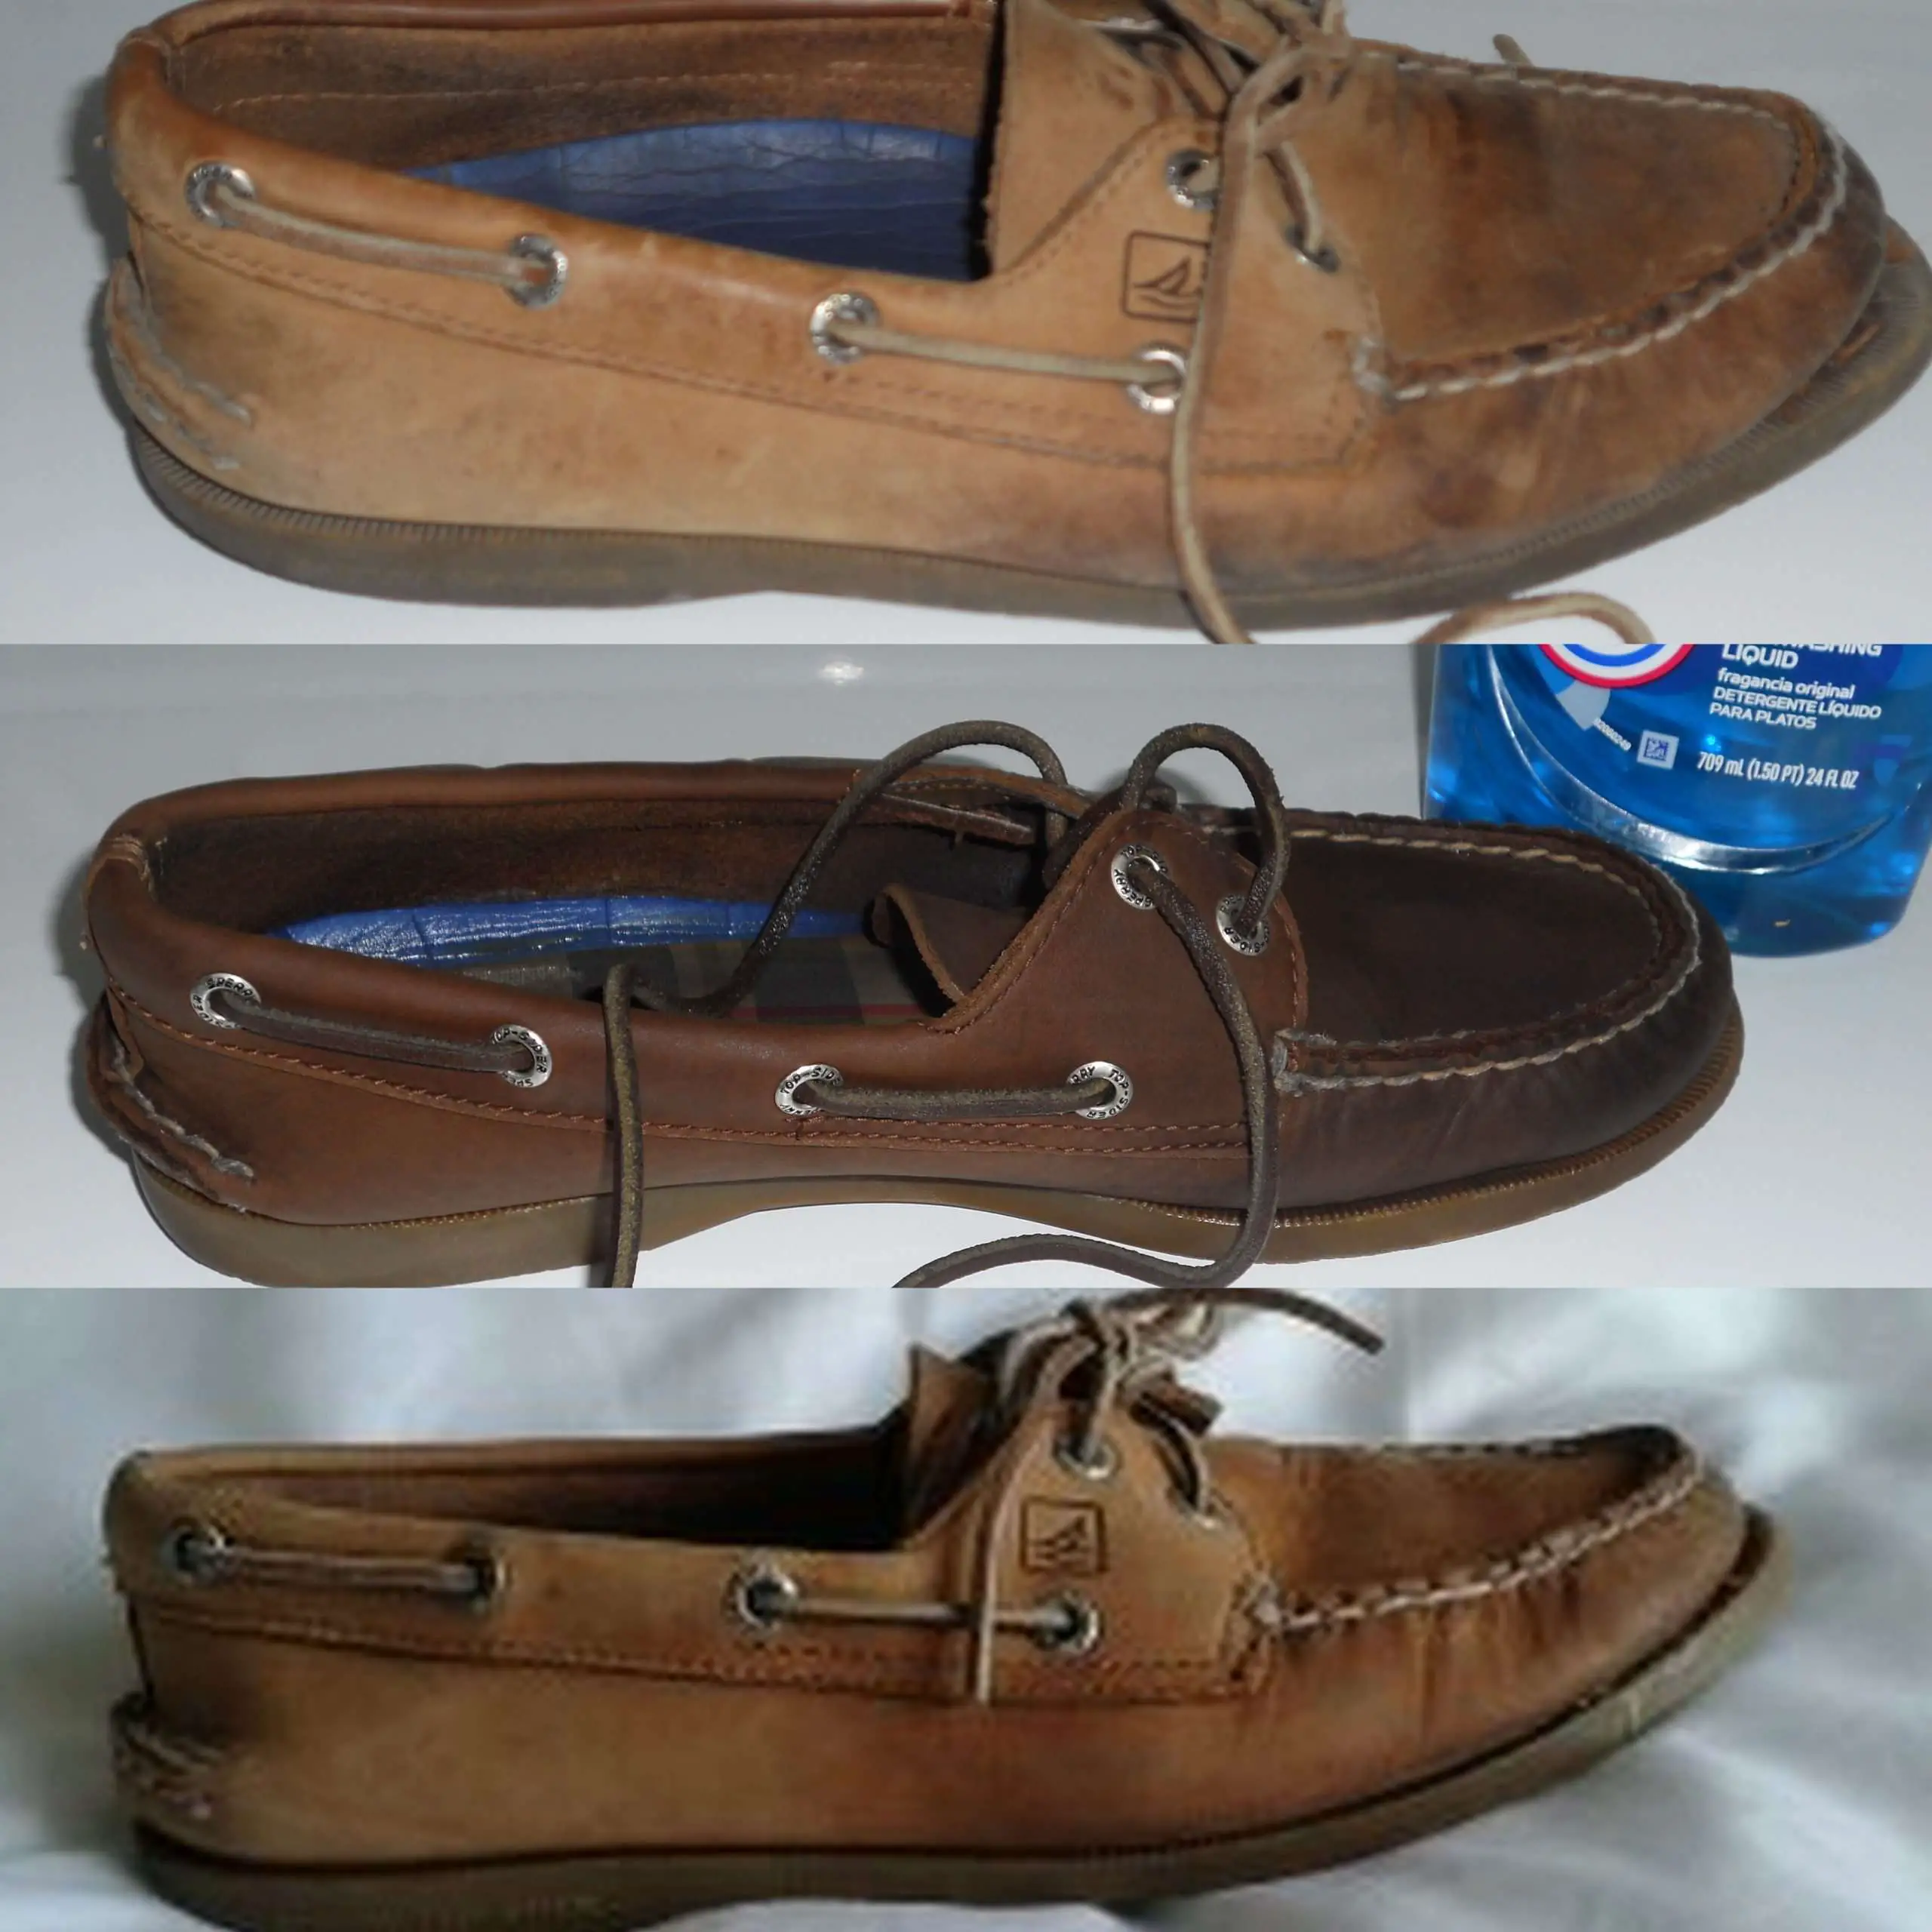 How to clean Sperry Top